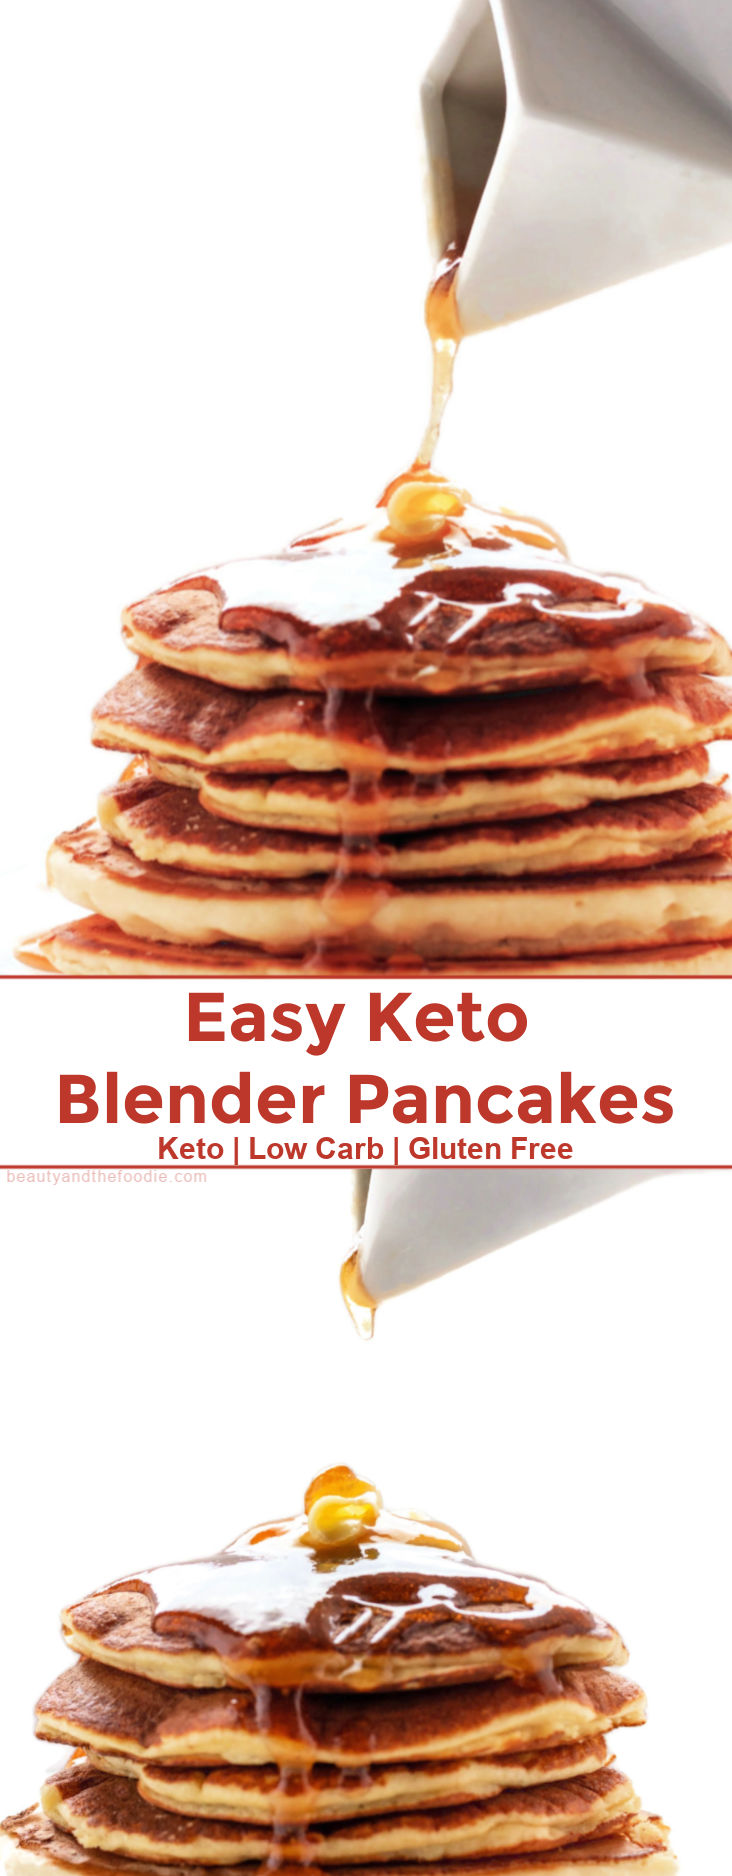 A stack of keto pancakes with syrup running down them.